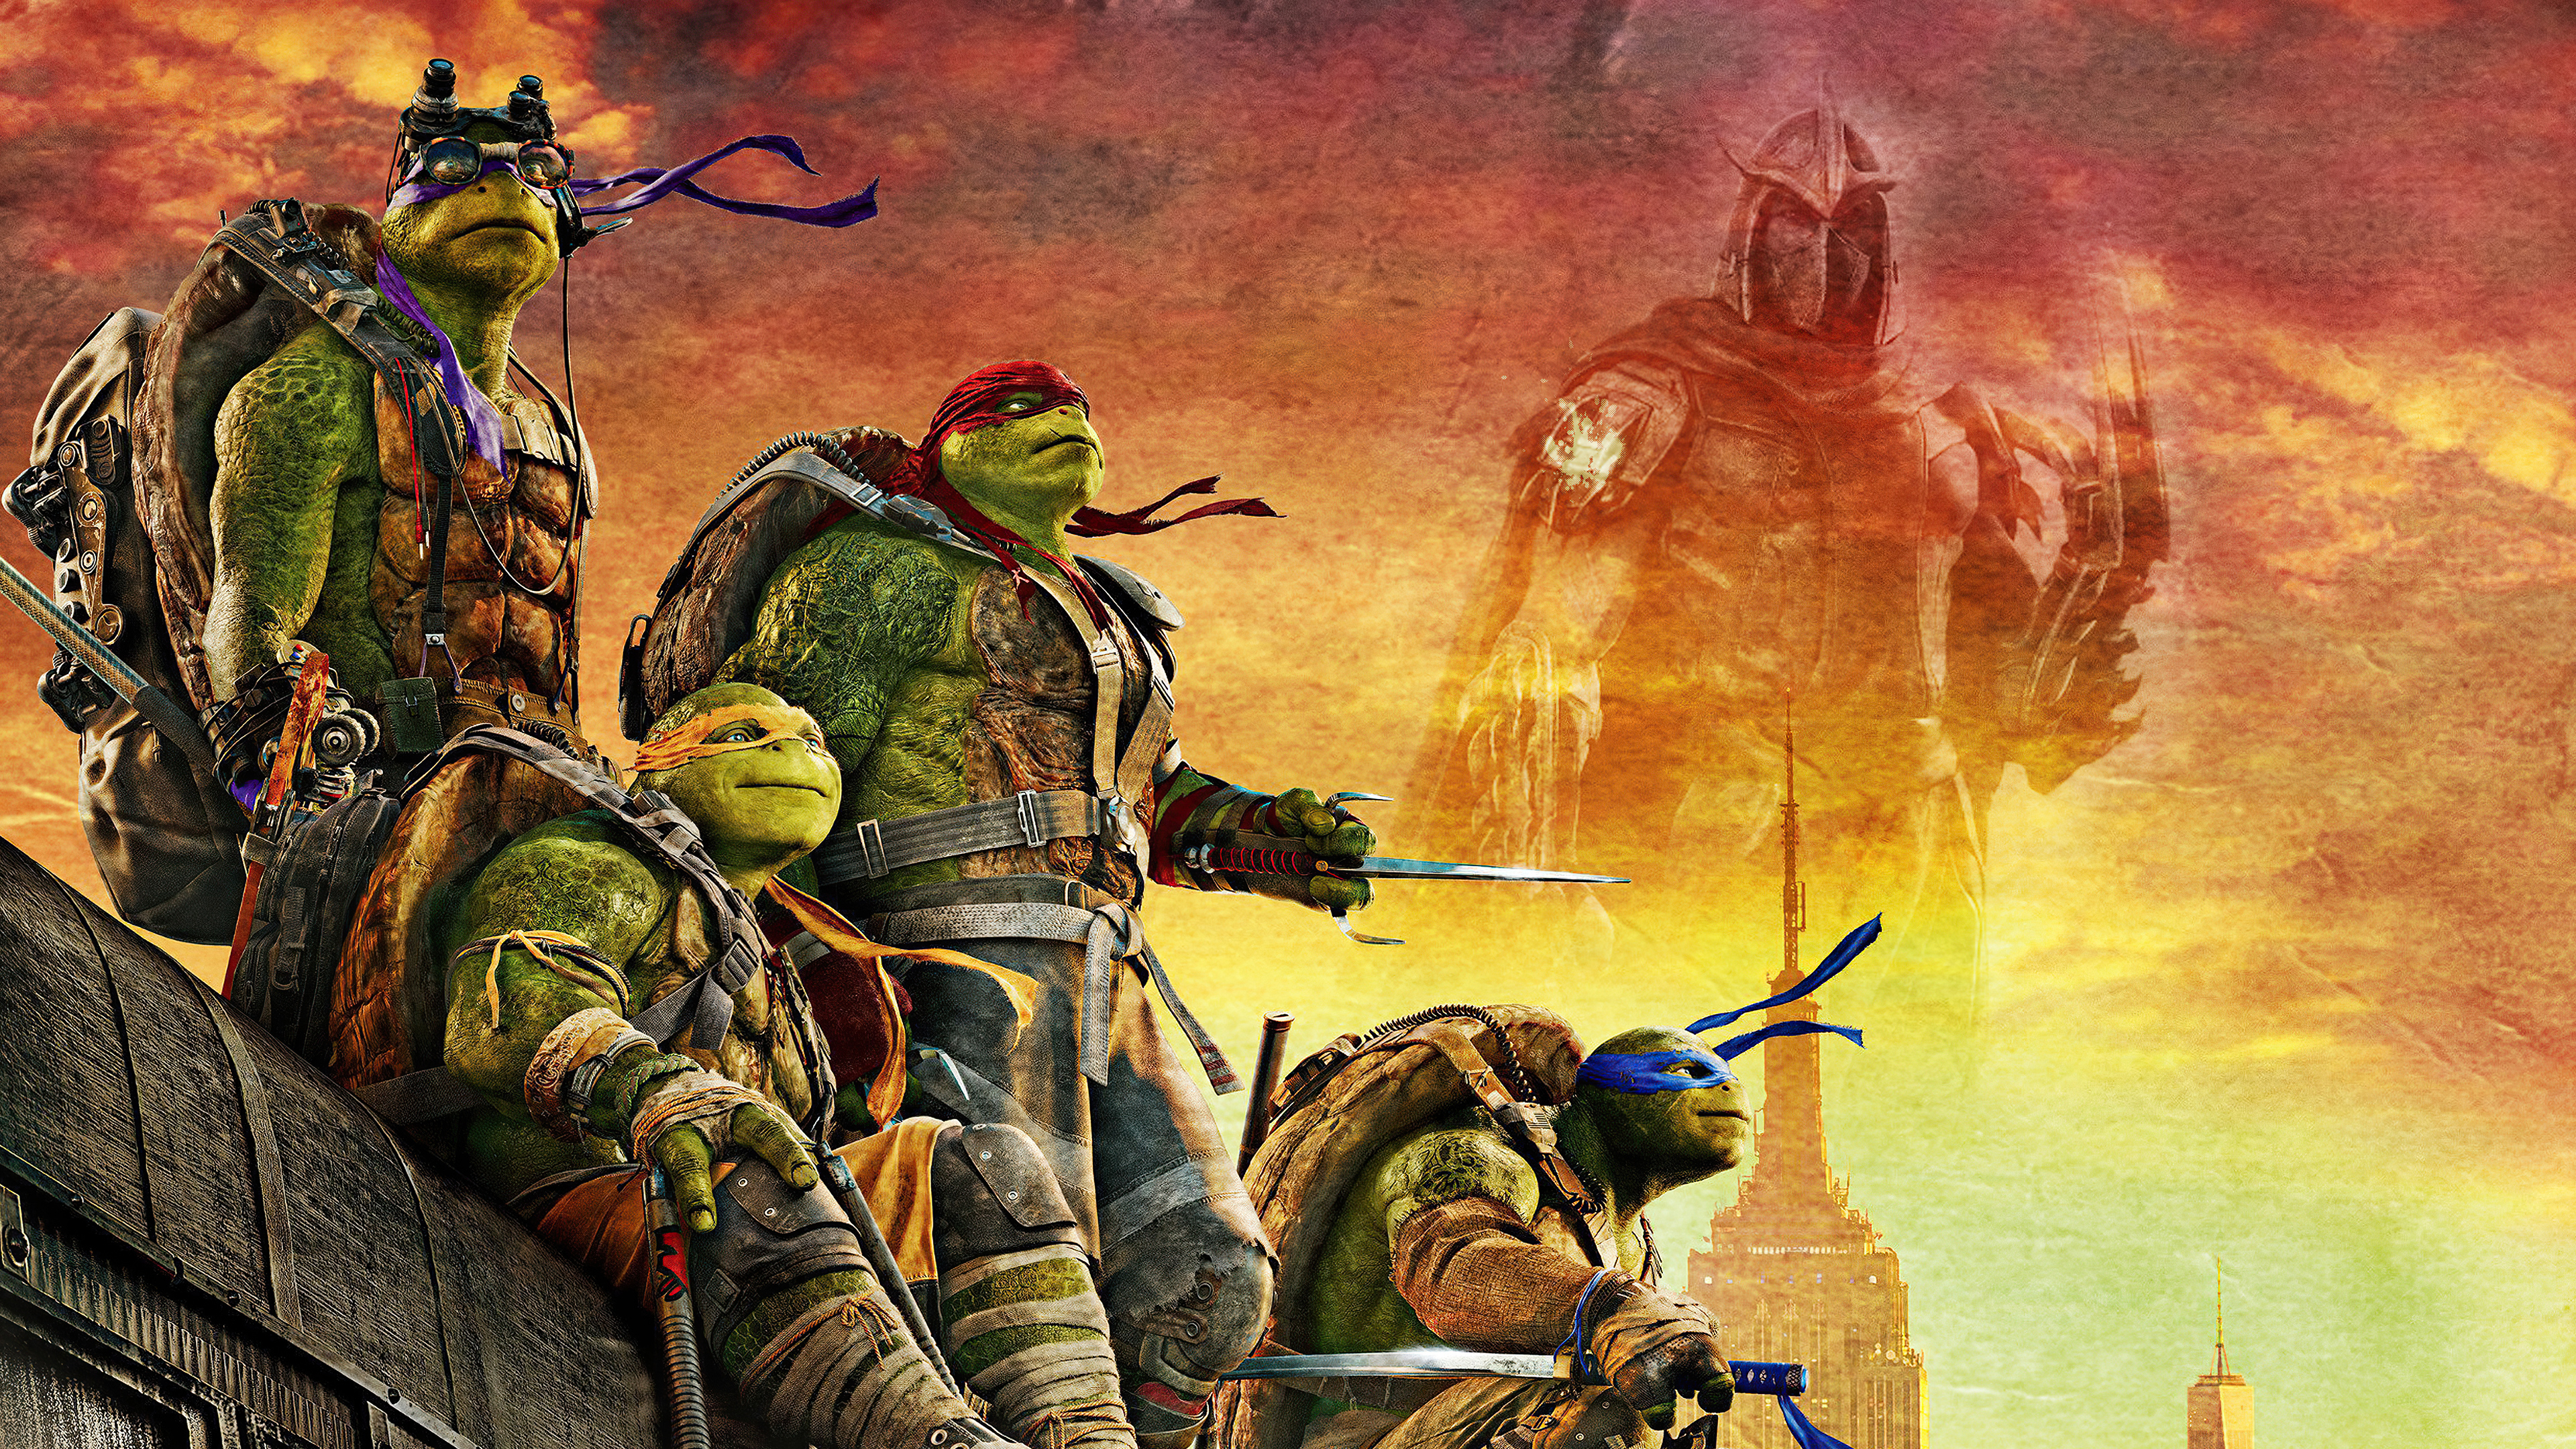 3840x2160 Teenage Mutant Ninja Turtles Movie Poster 4k, HD Movies, 4k Wallpapers, Images, Backgrounds, Photos and Pictures